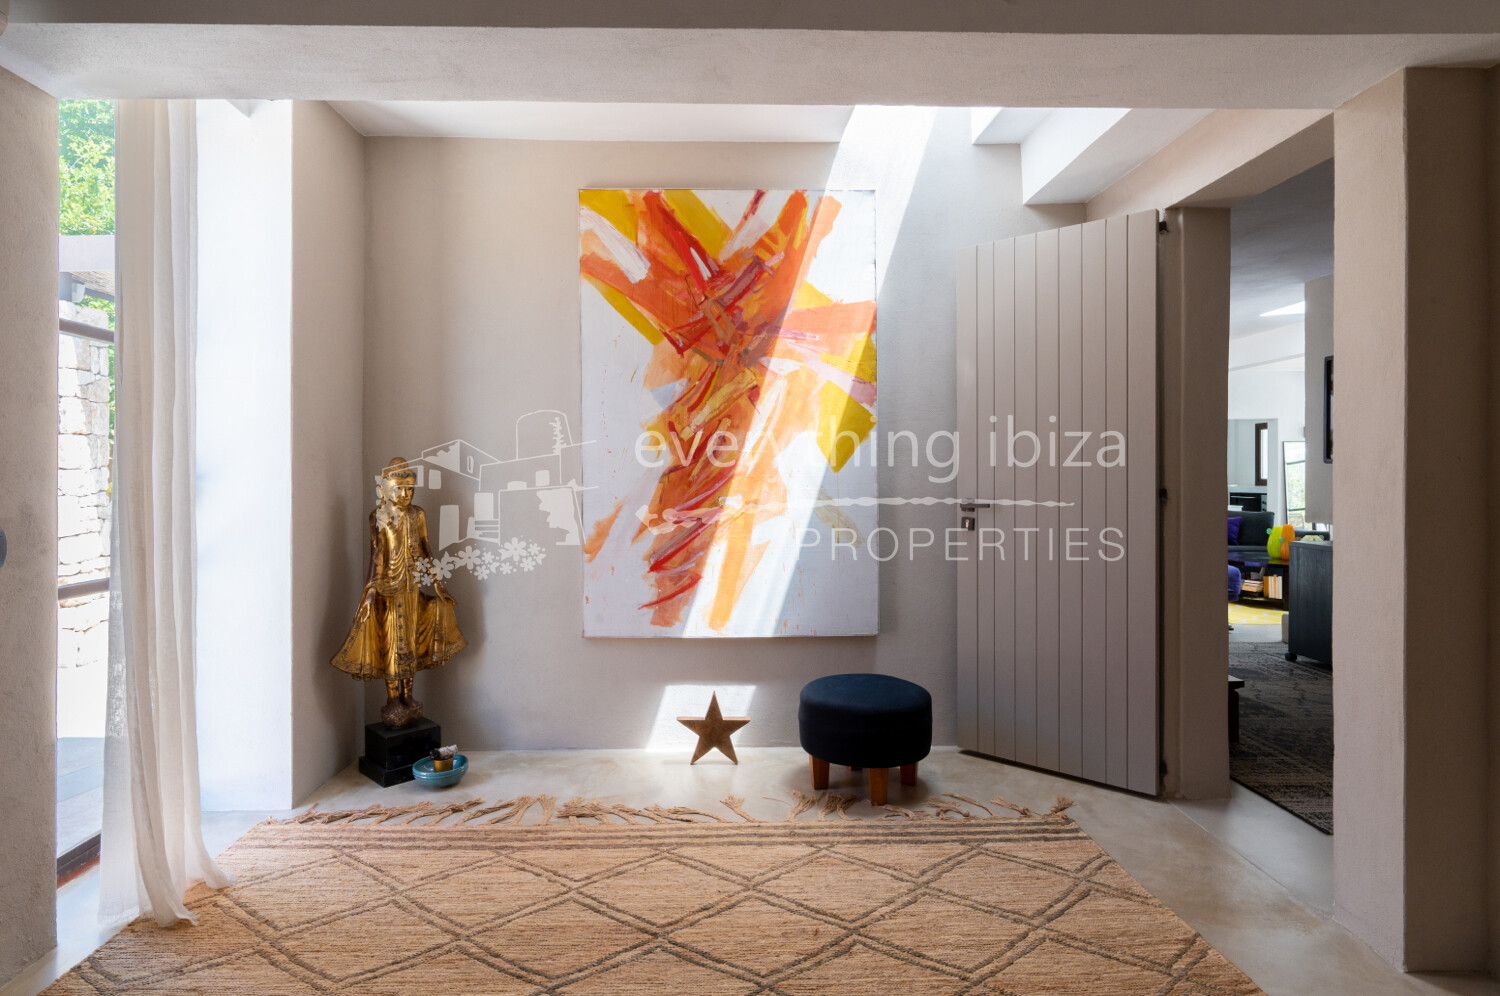 Exquisite Luxury Villa Close to Cosmopolitan San Rafael, ref. 1610, for sale in Ibiza by everything ibiza Properties